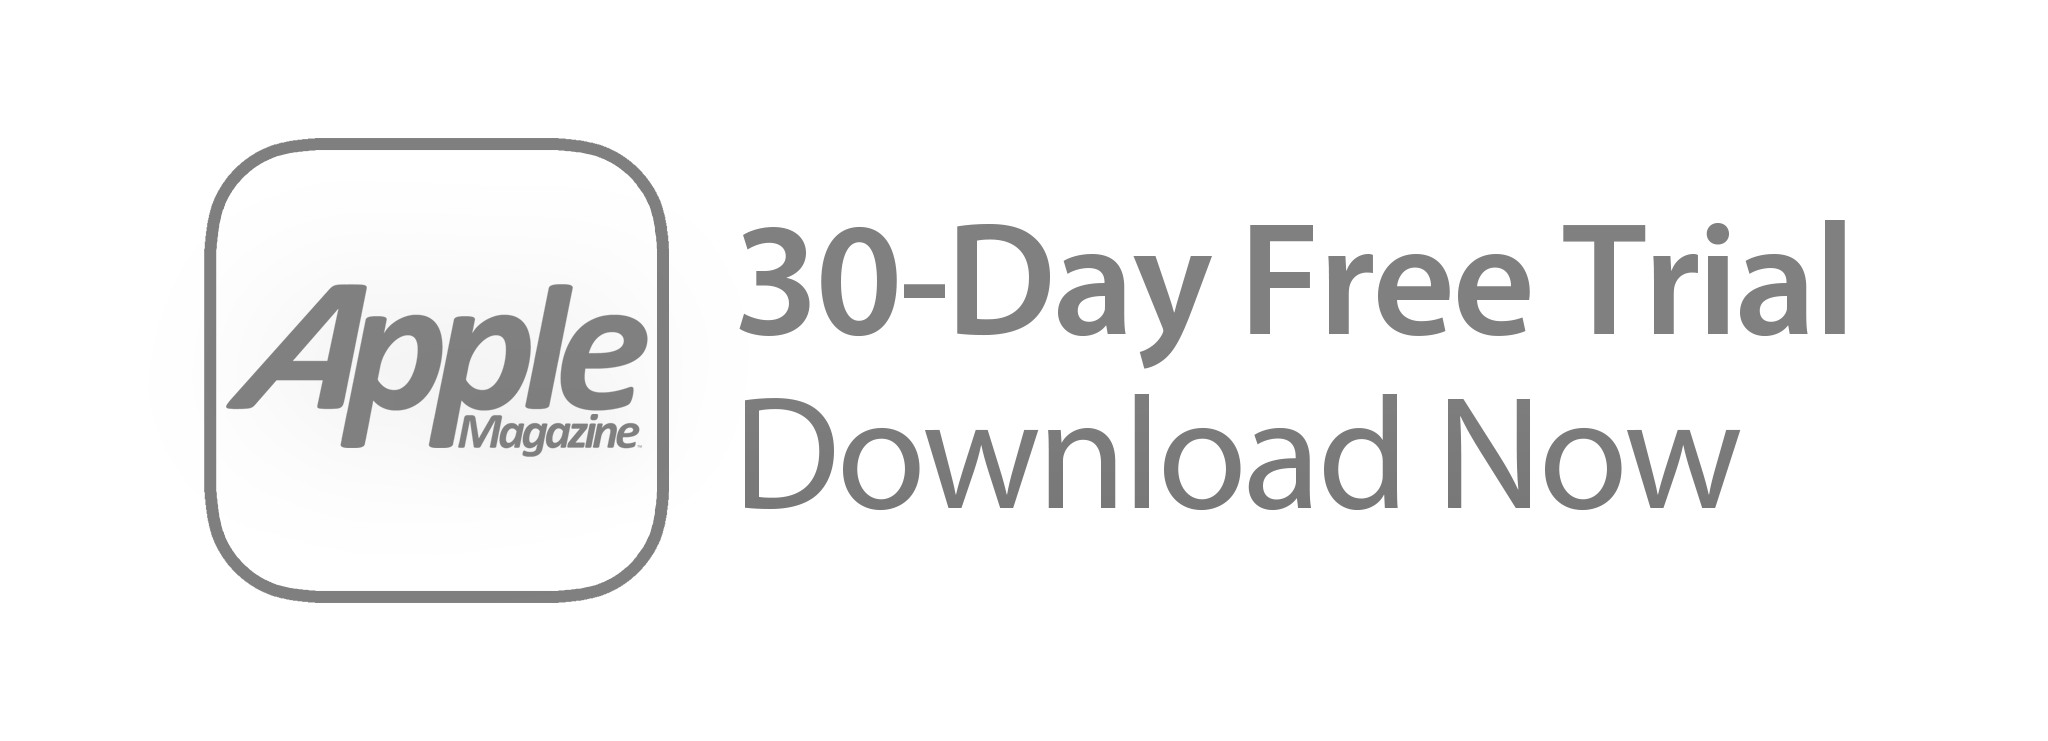 30 day free trial badge v2